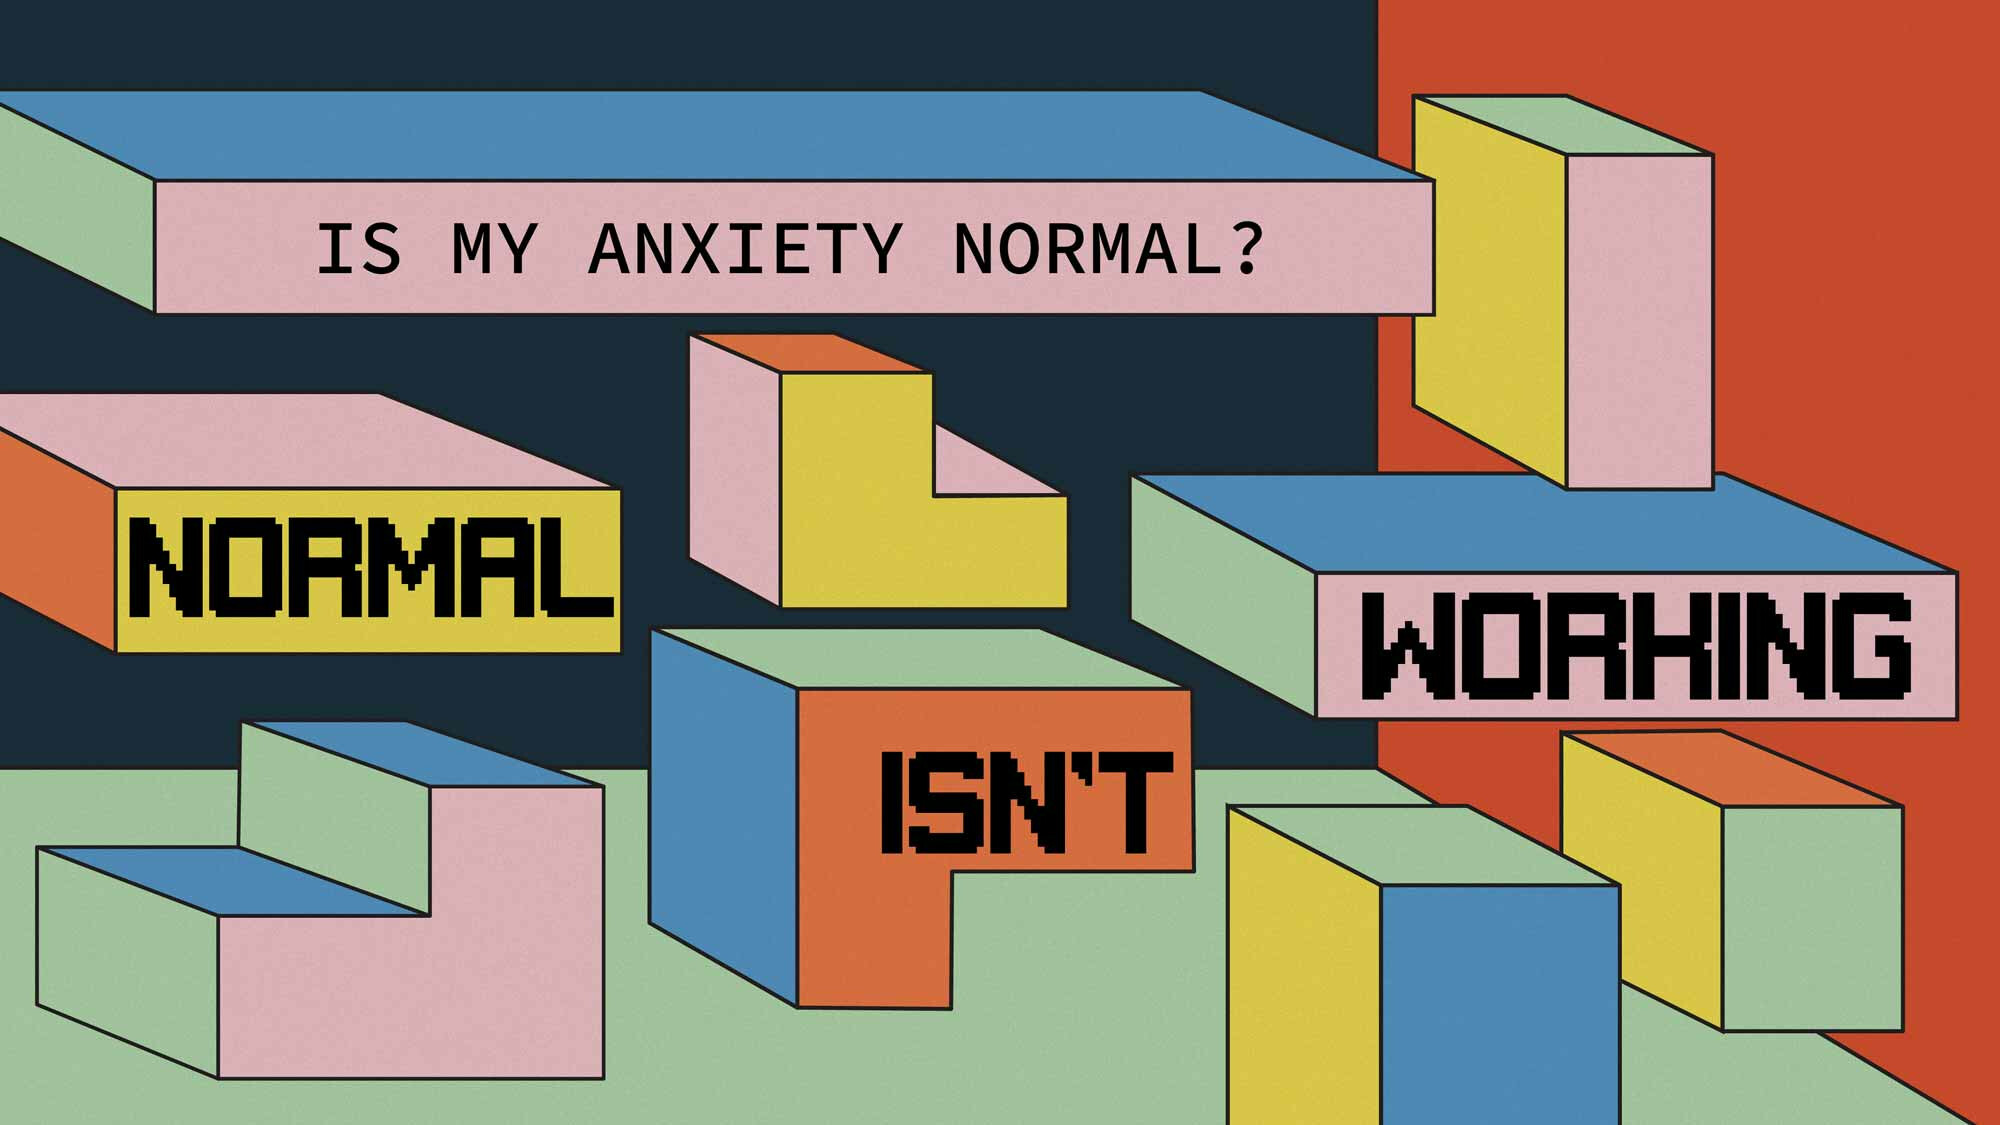 Is my anxiety normal?